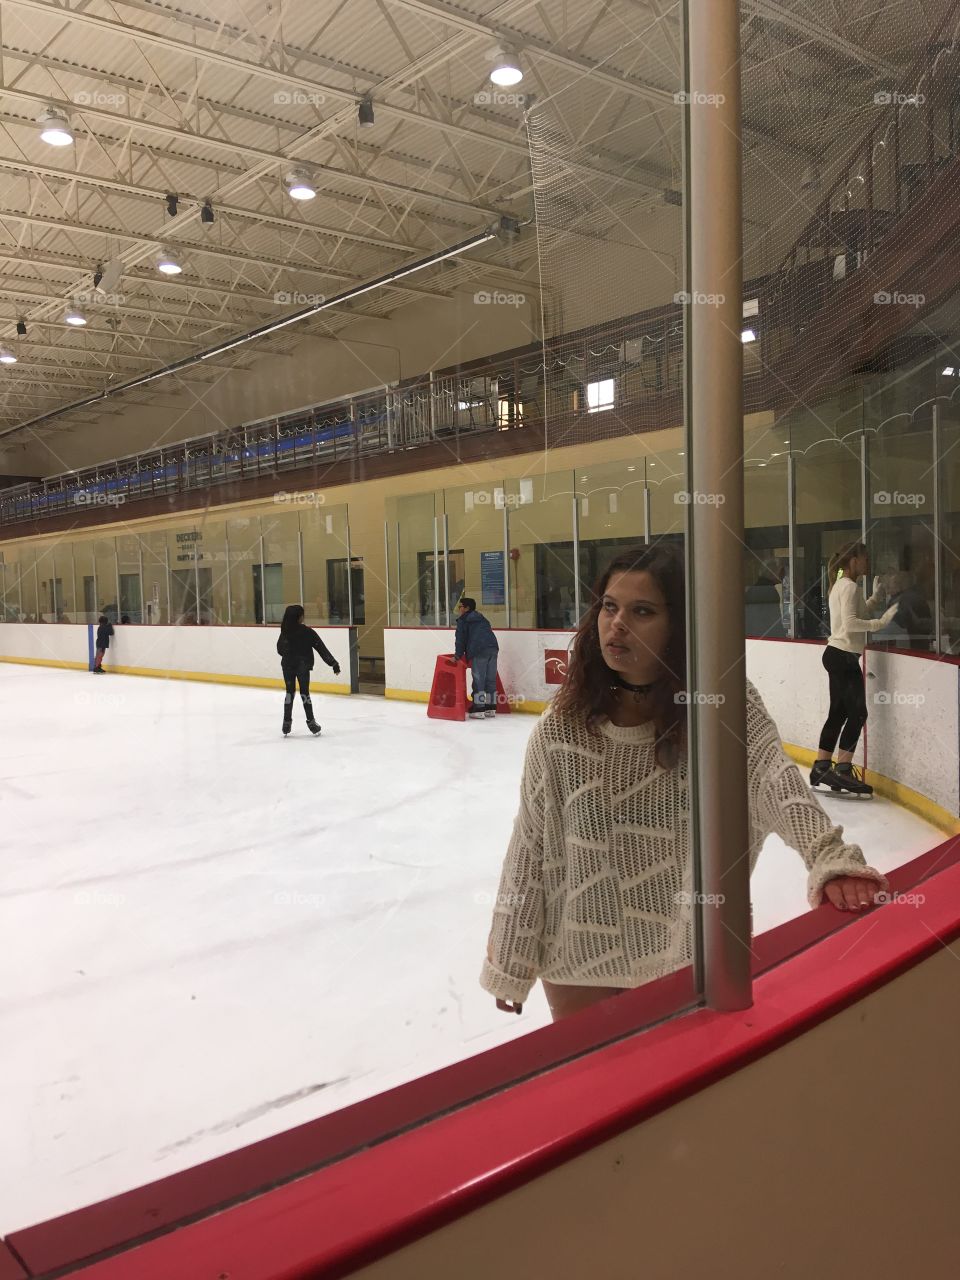 Yes, it’s summer. Yes, I’m I’m ice skating. Never too early to hit the rinks! Ice paradise in Santa Barbara 